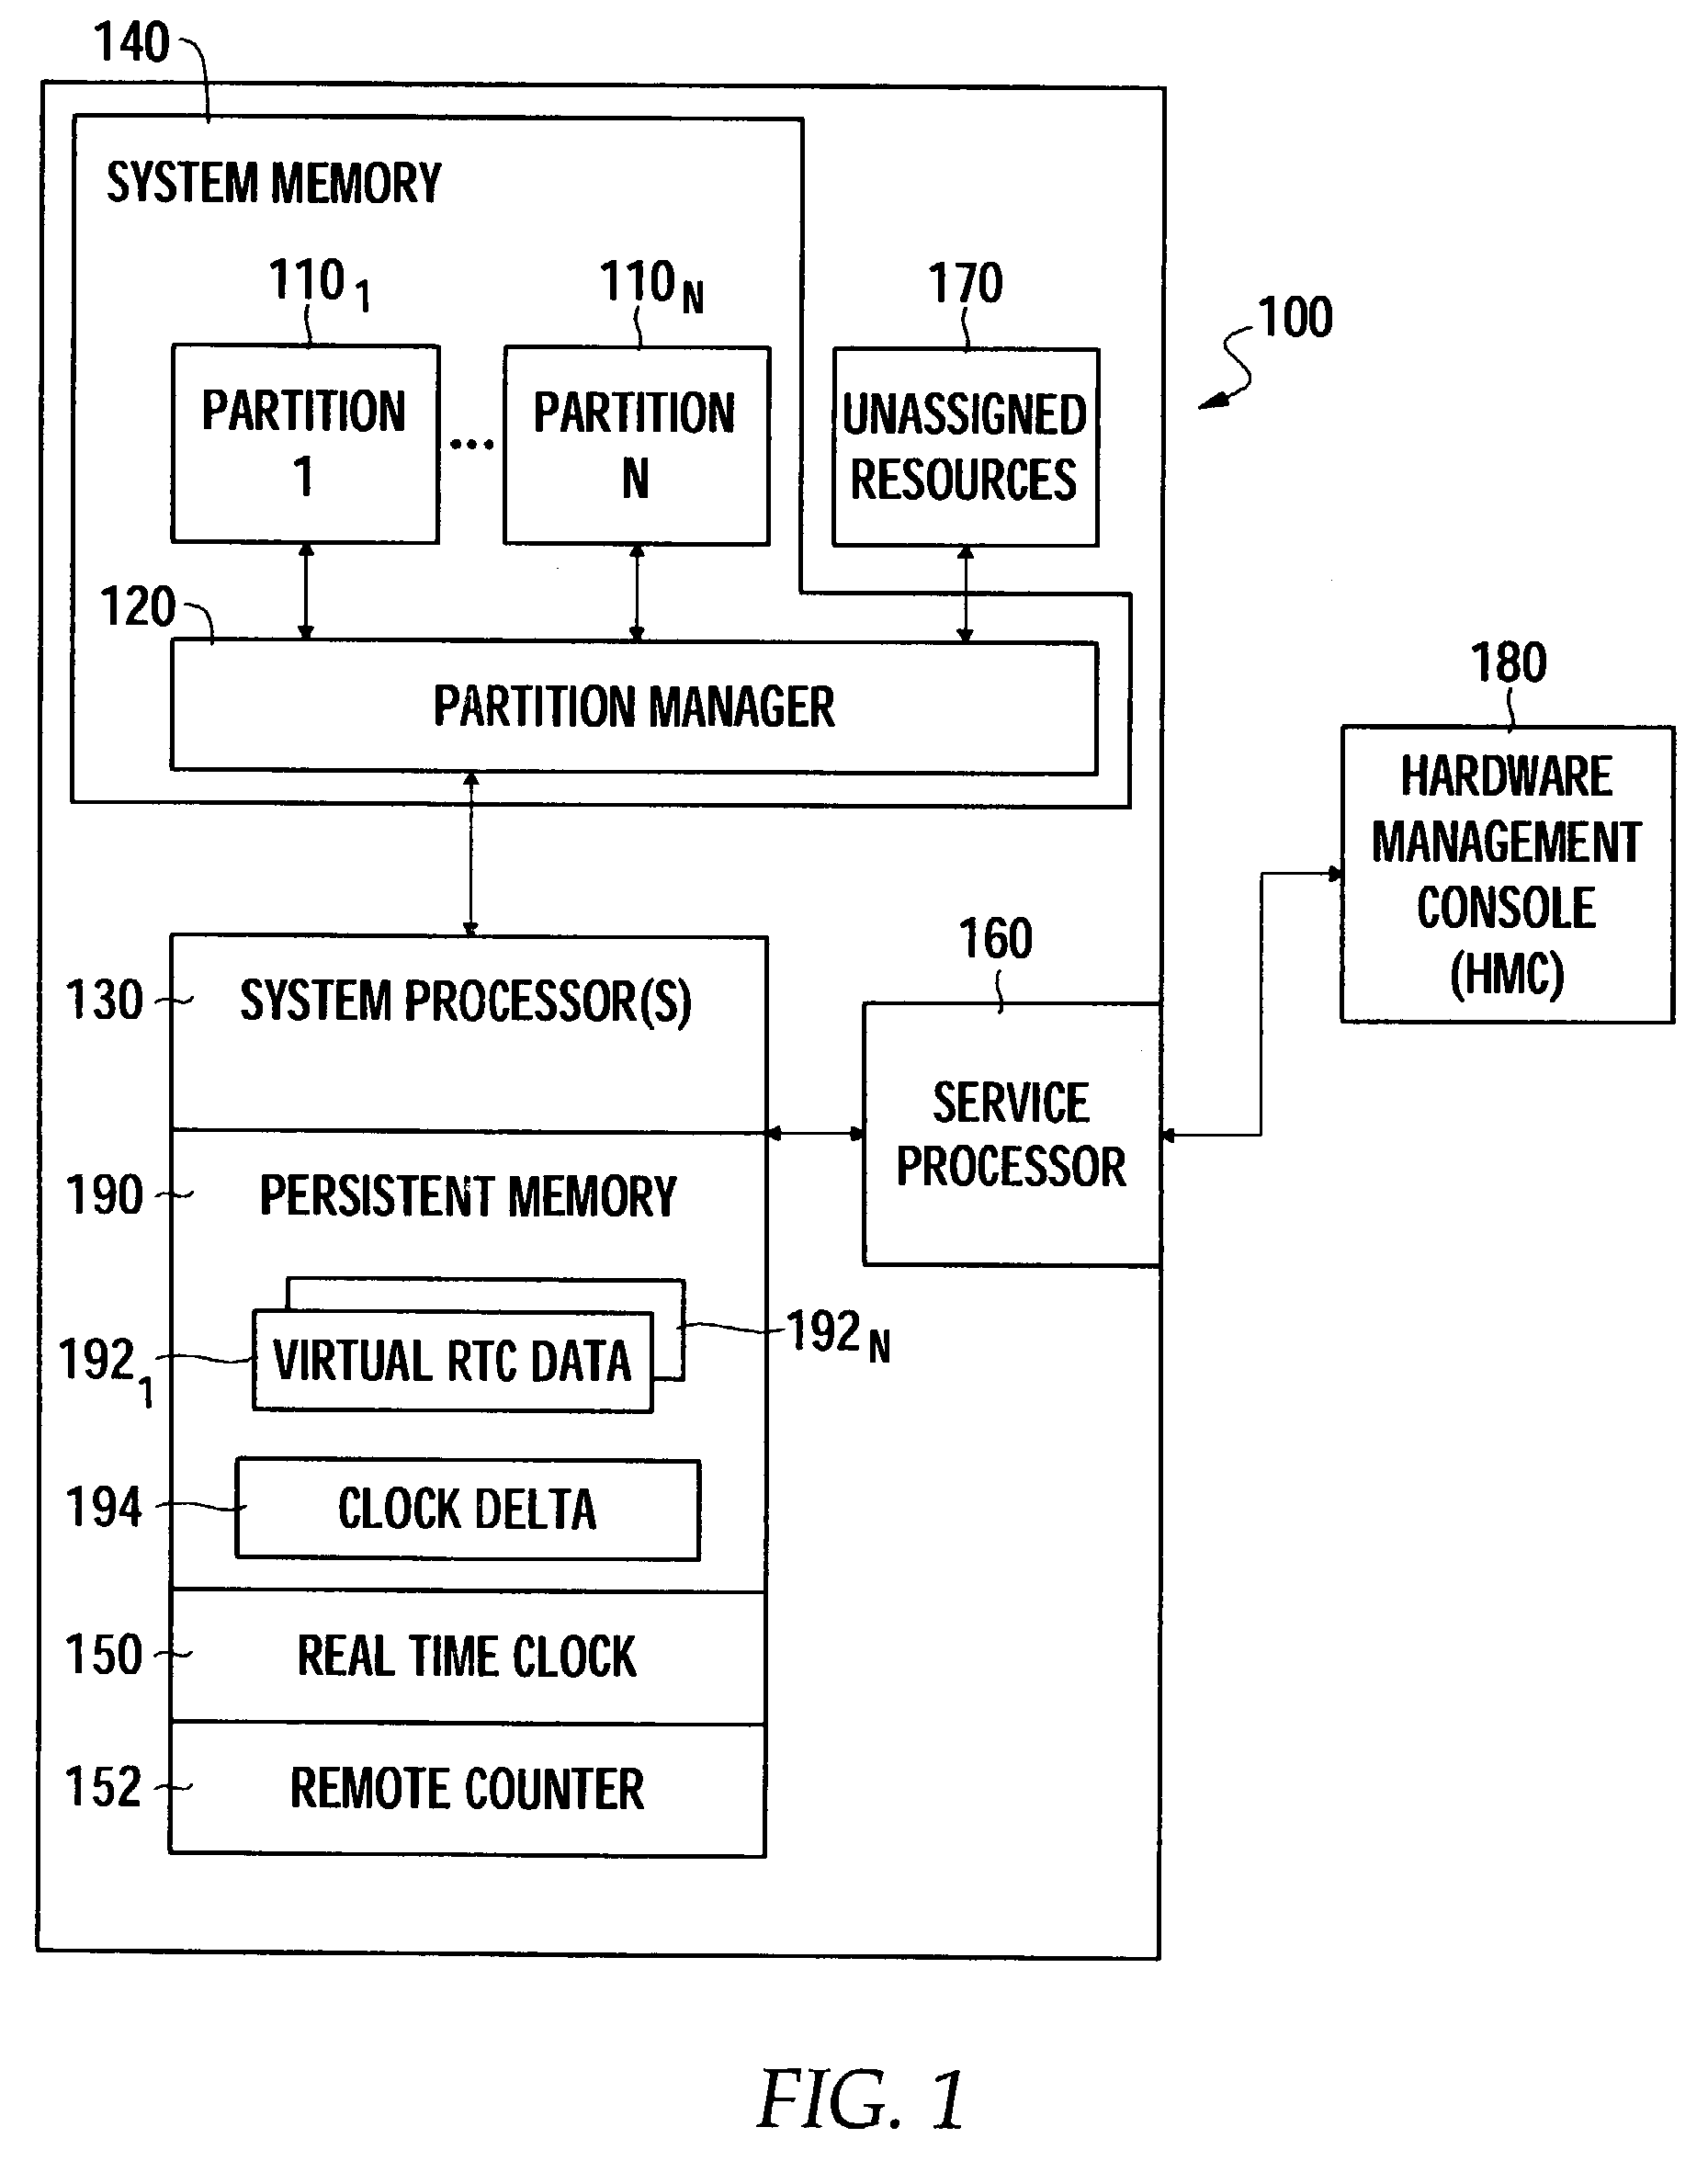 Virtual real time clock maintenance in a logically partitioned computer system